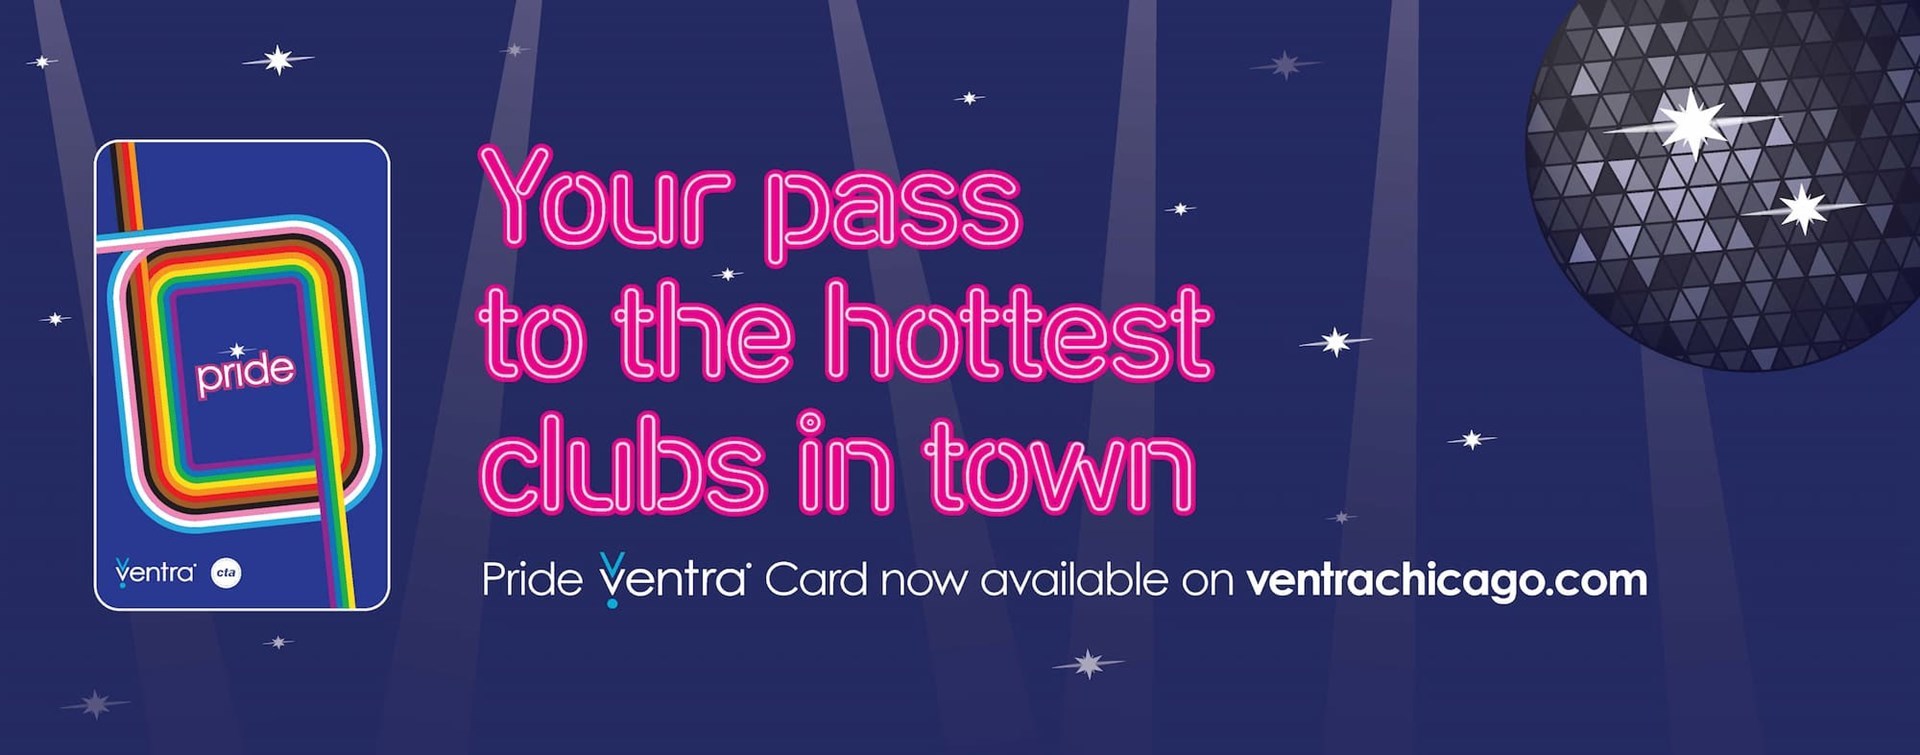 Advertisement with neon letters and disco ball. Your pass to the hottest clubs in town. Pride Ventra Card now available on ventrachicago.com.